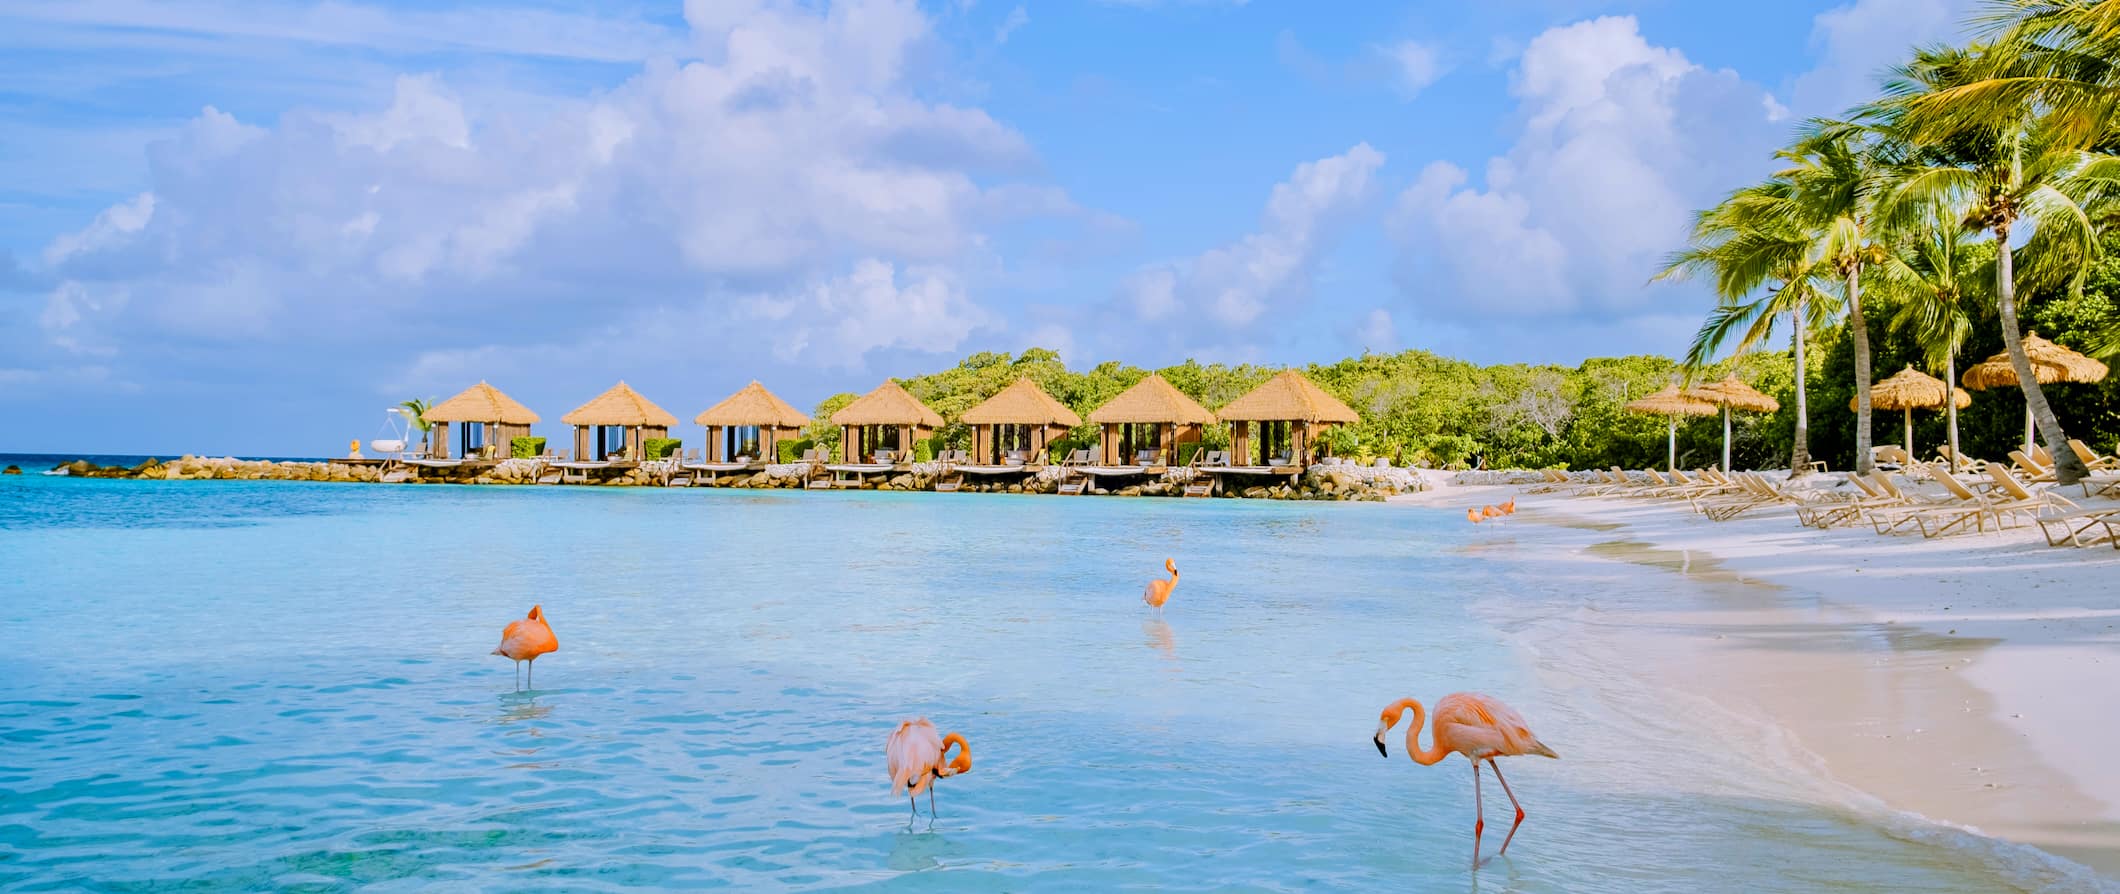 Flamingoes in the shallow water along the shores of Aruba